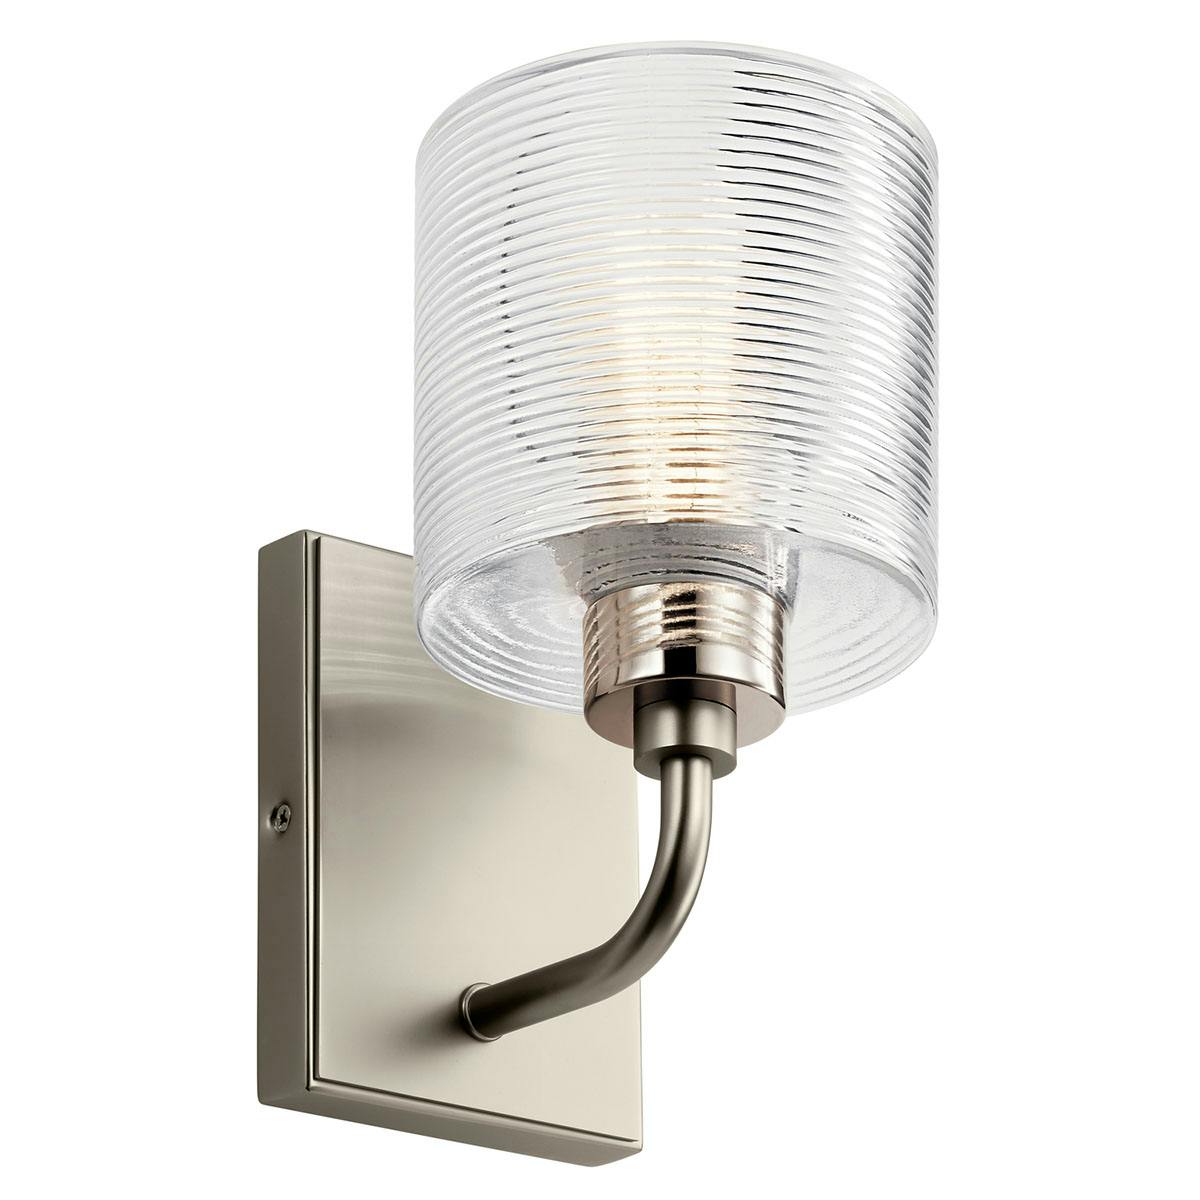 Harvan 9.25" 1 Light Sconce Nickel on a white background